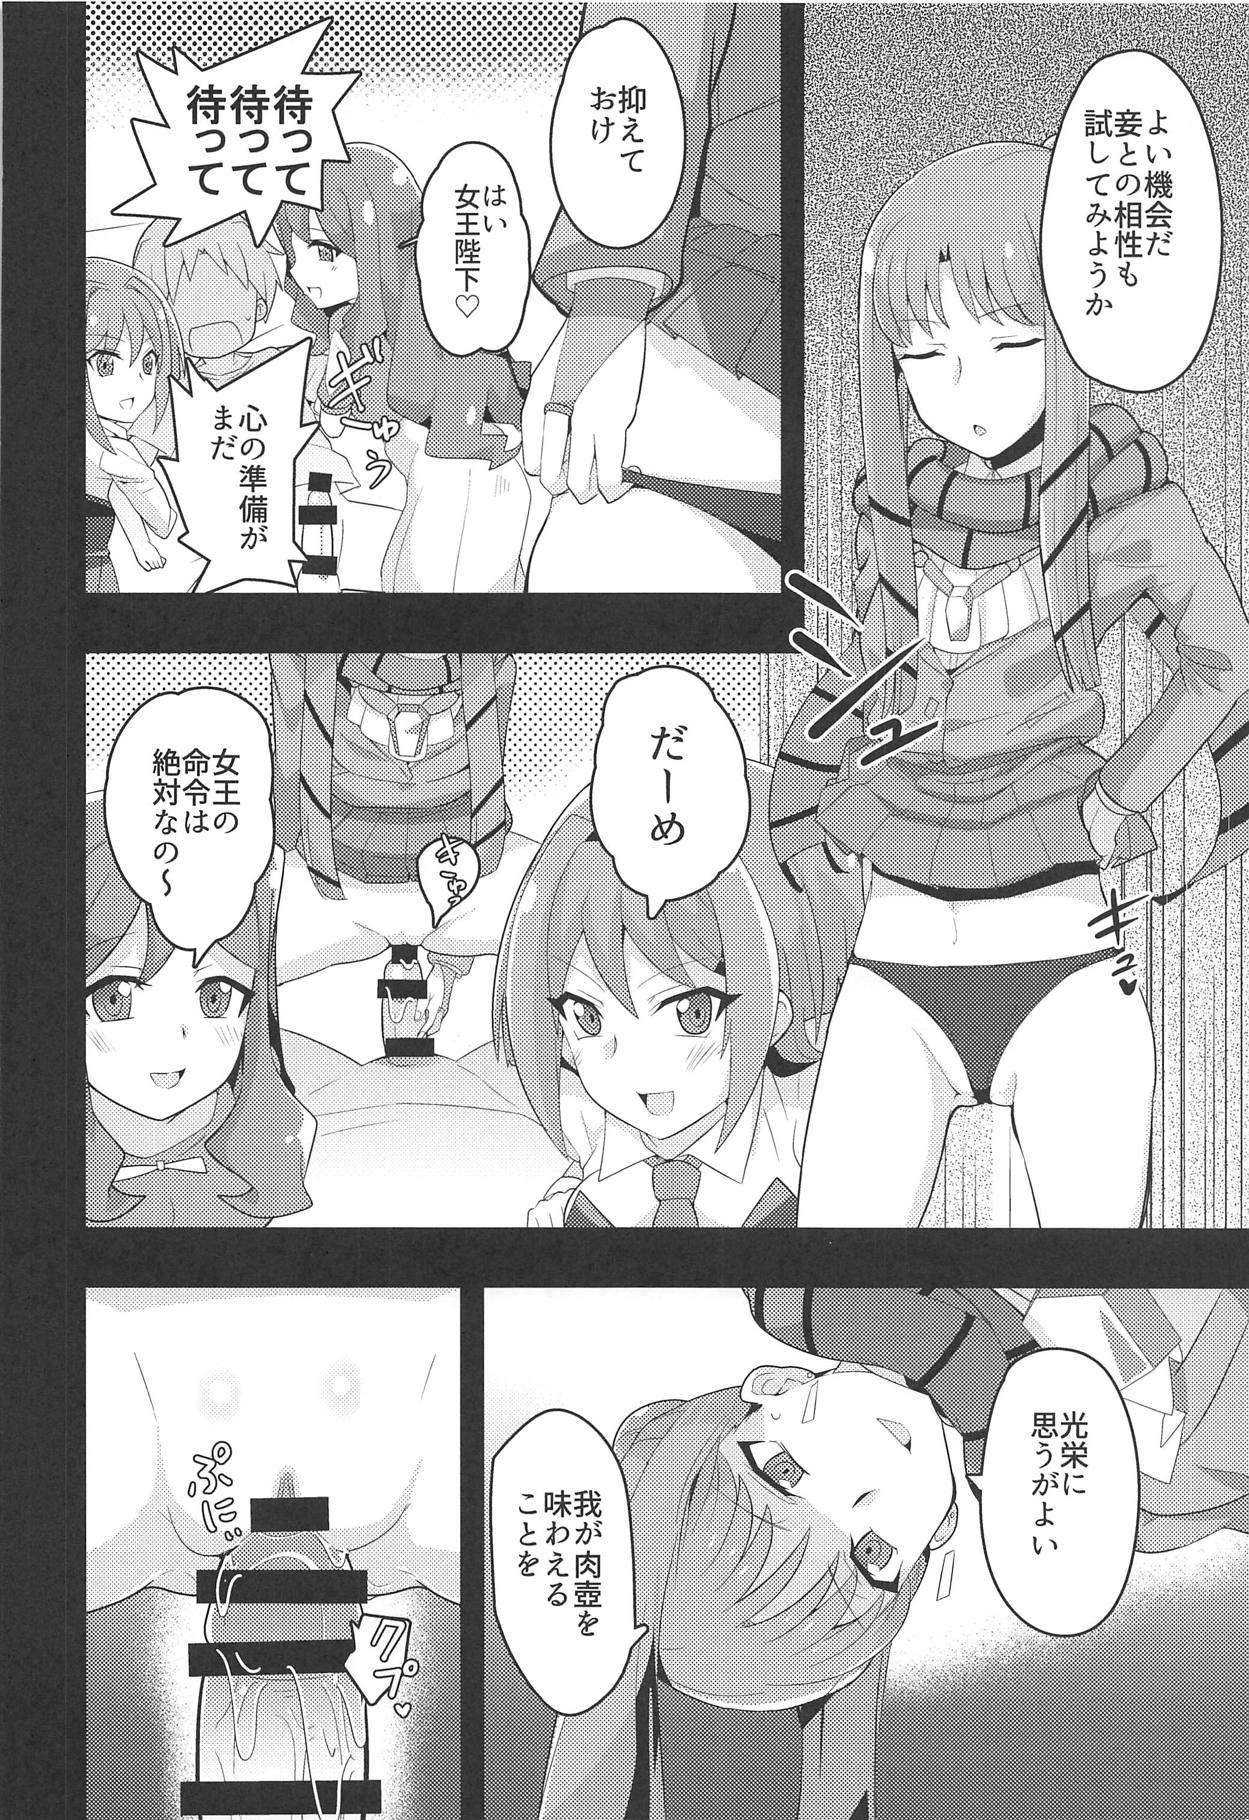 Female Image Mob Kan GZ - Cardfight vanguard Analsex - Page 9